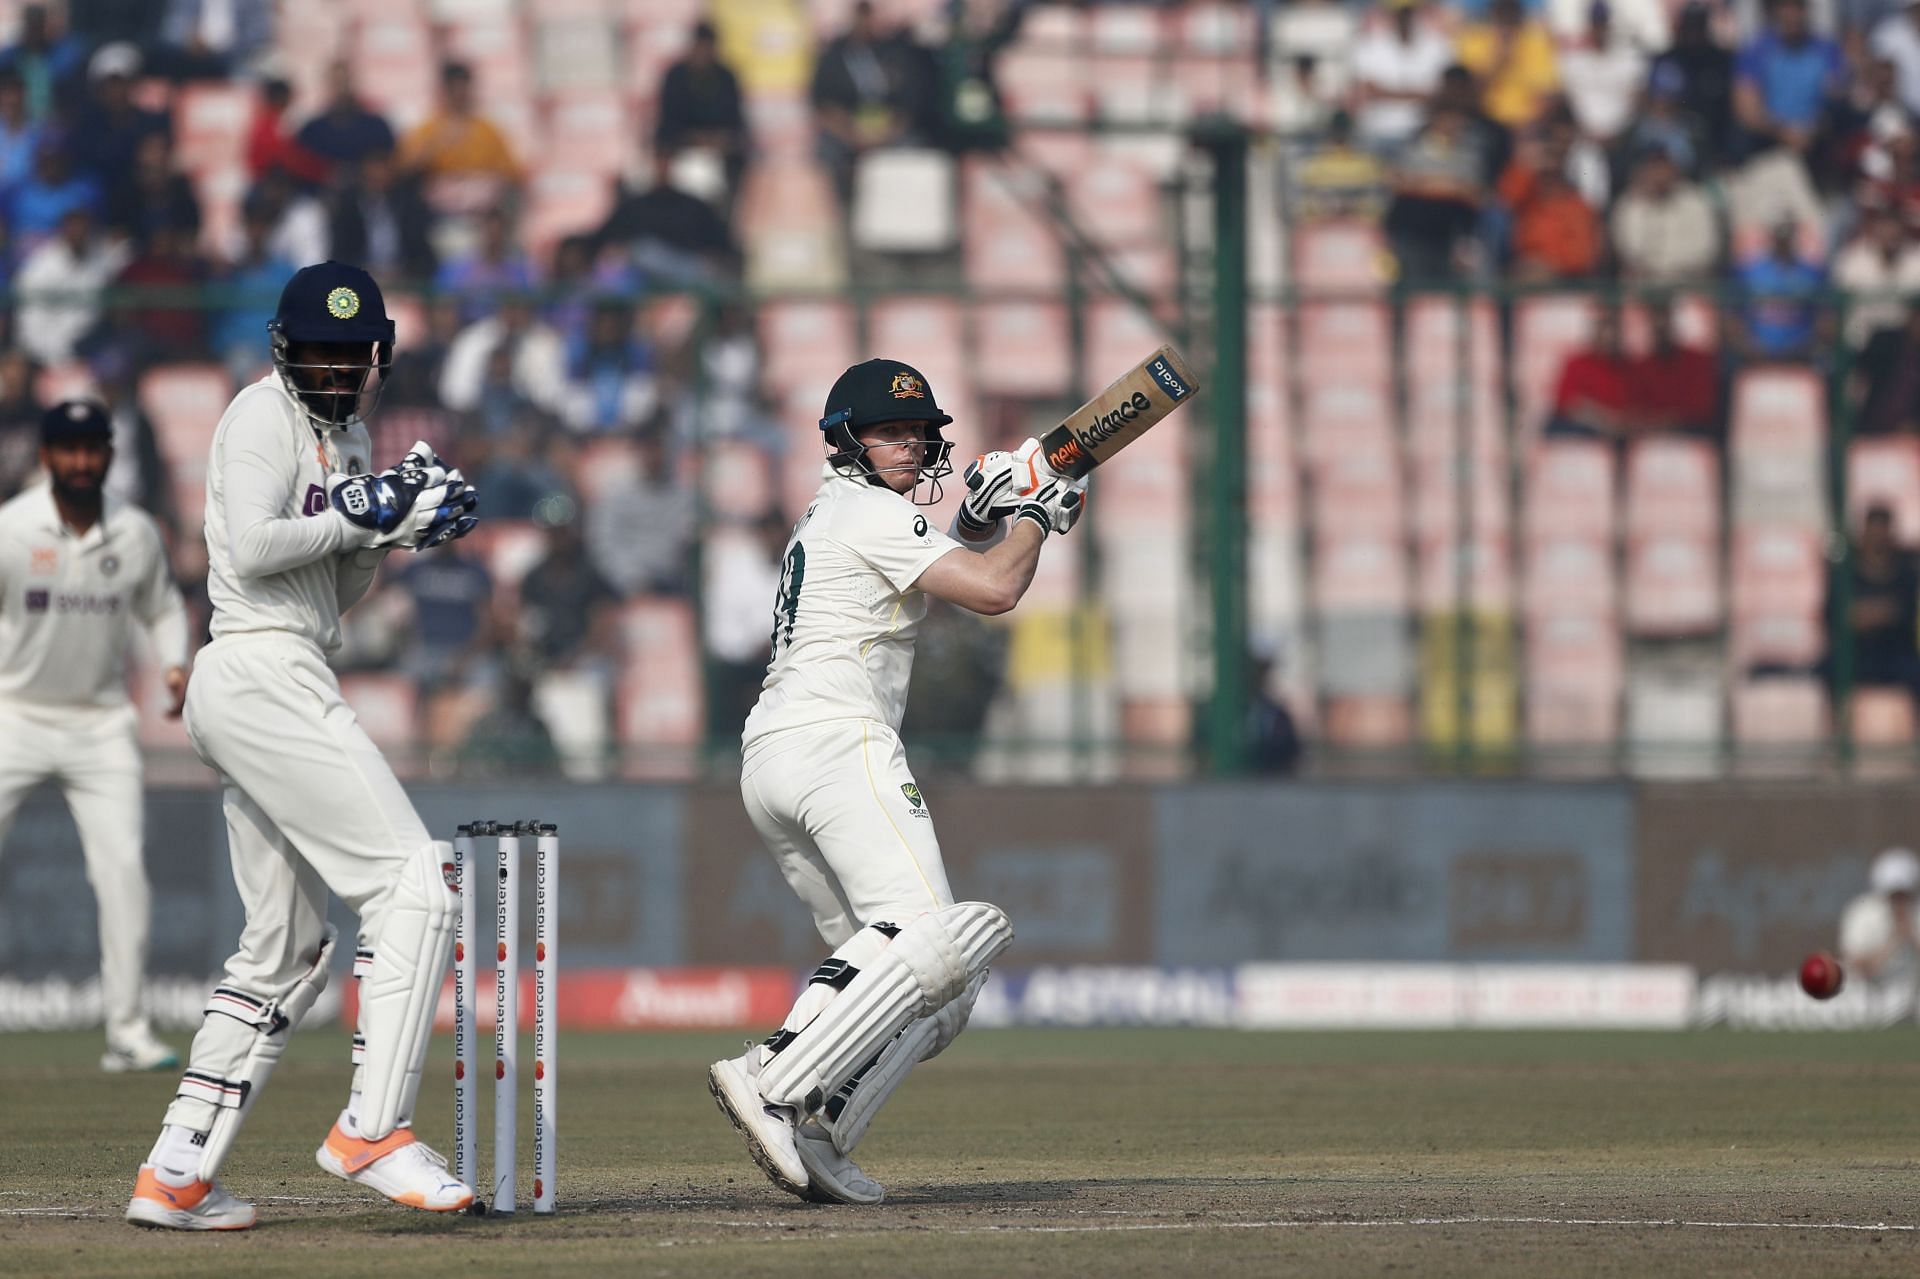 The Aussie batter during the Delhi Test (Pic: Getty Images)